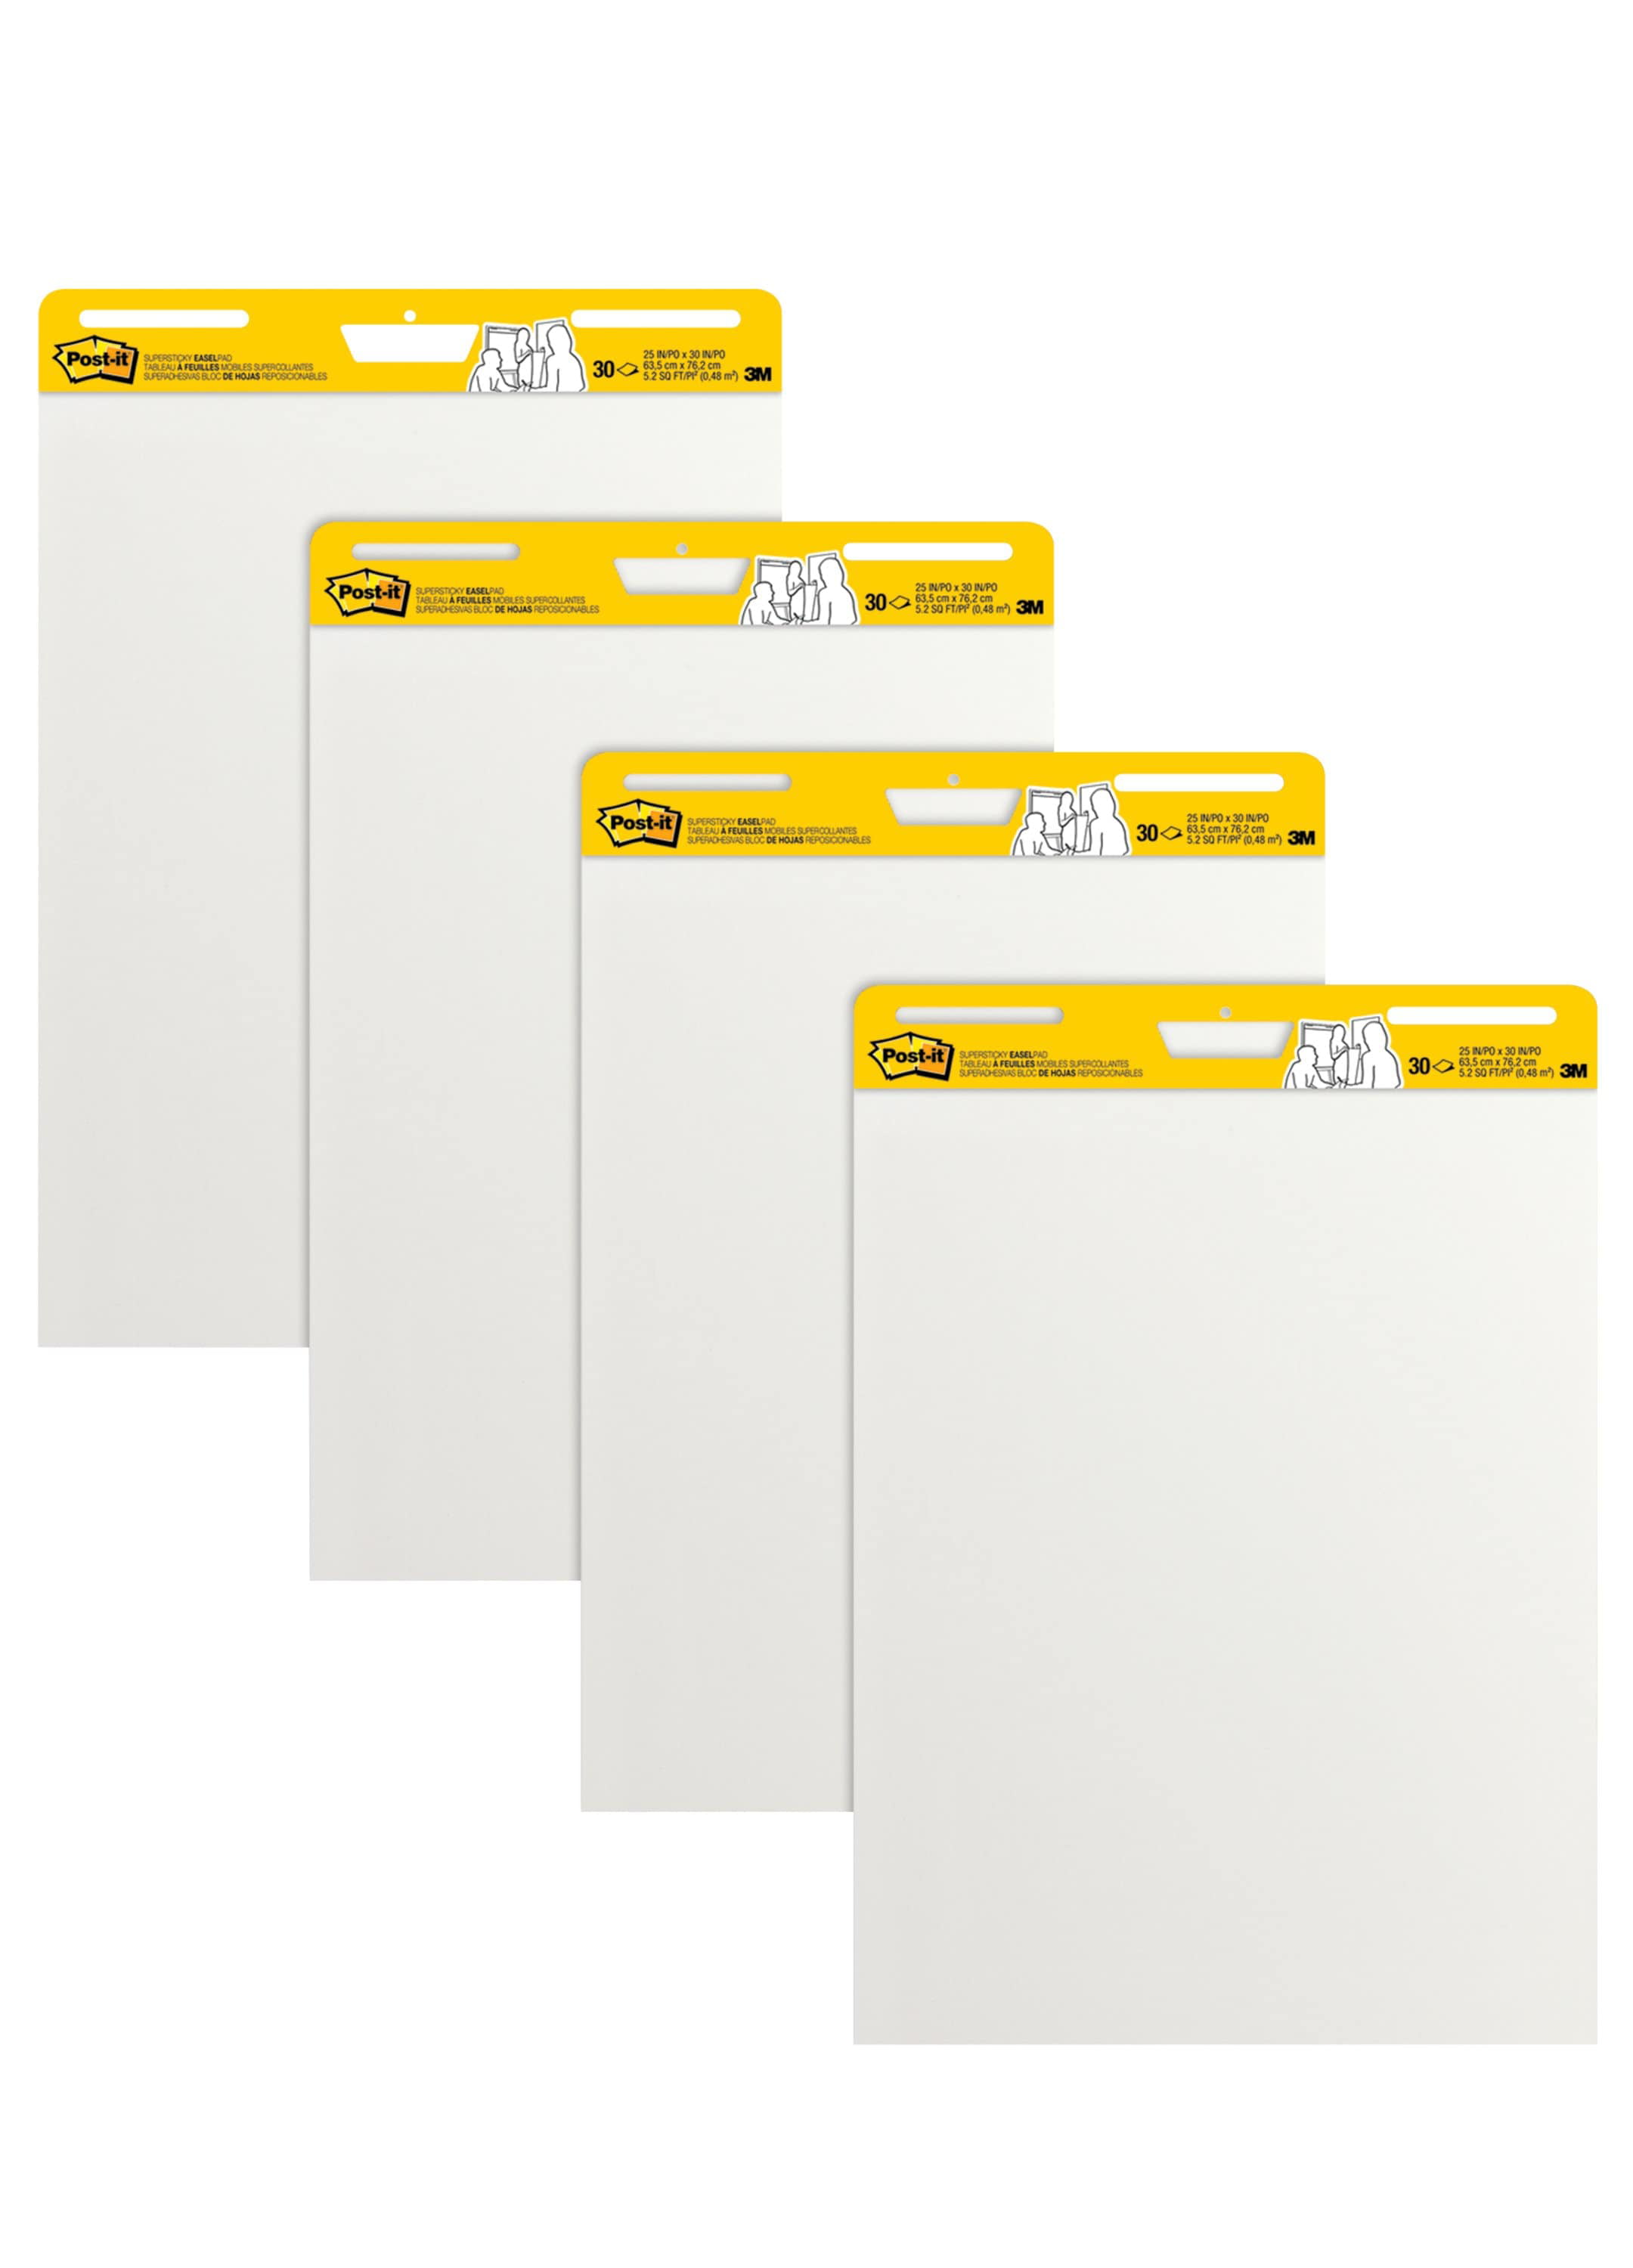 30-Sheet Pads/Carton 6 PACK Post-it Self-Stick Easel Pads 25 x 30 White 